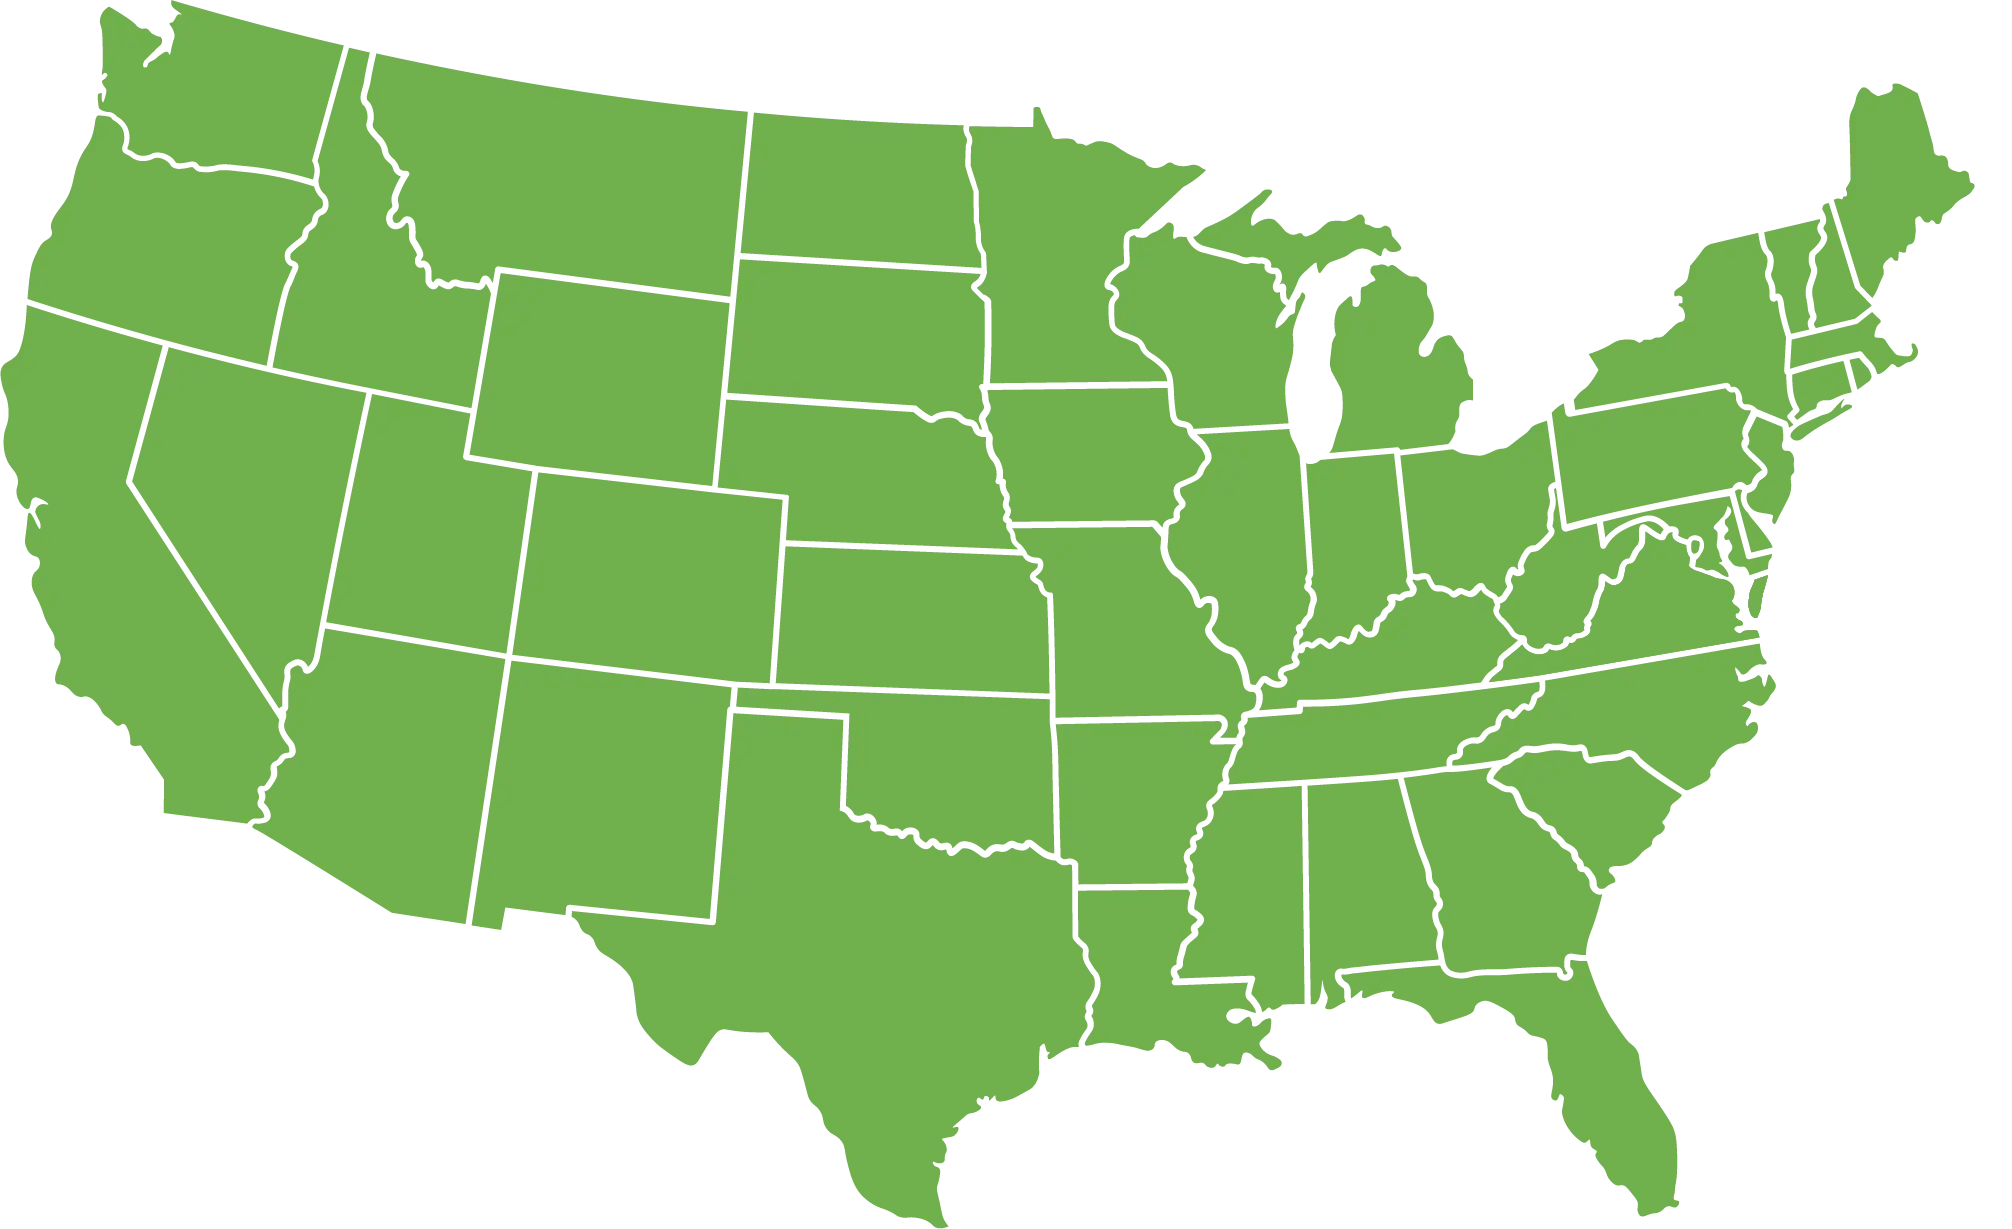 United States range map for the House Mouse